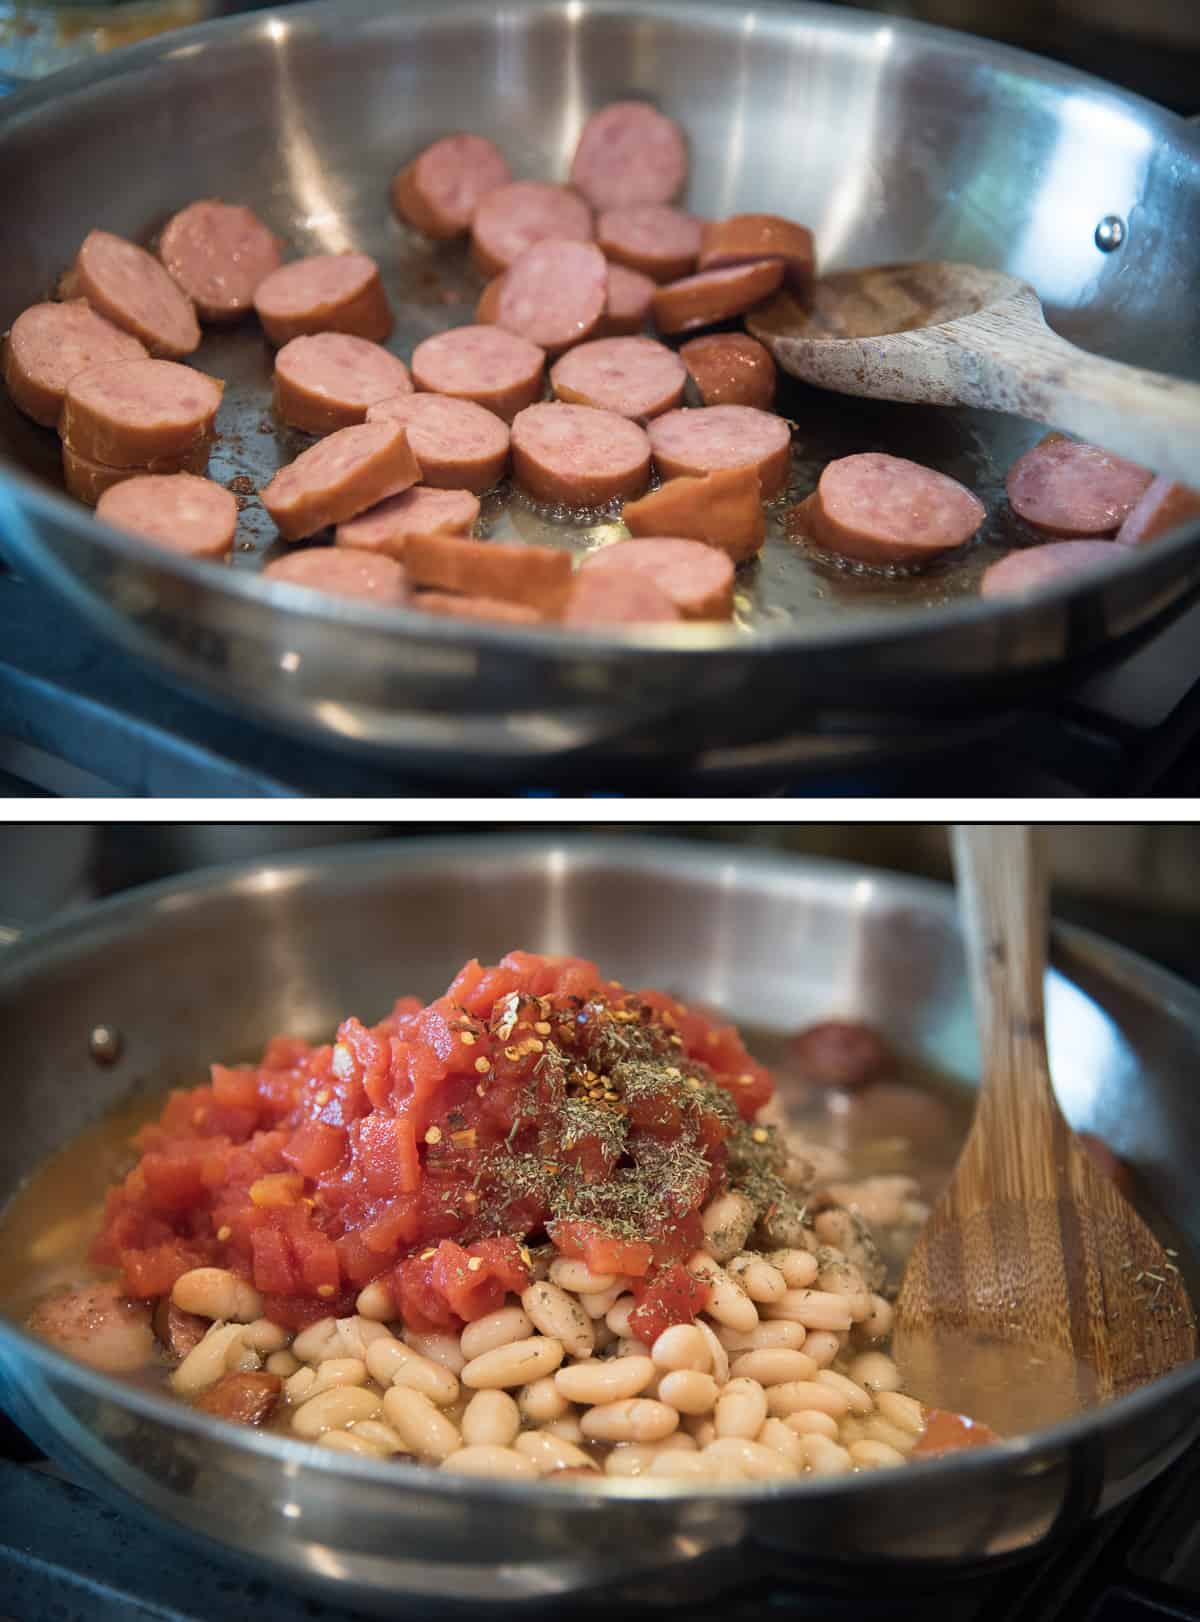 Two images of sausage browning in a skillet and diced tomatoes and white beans added.